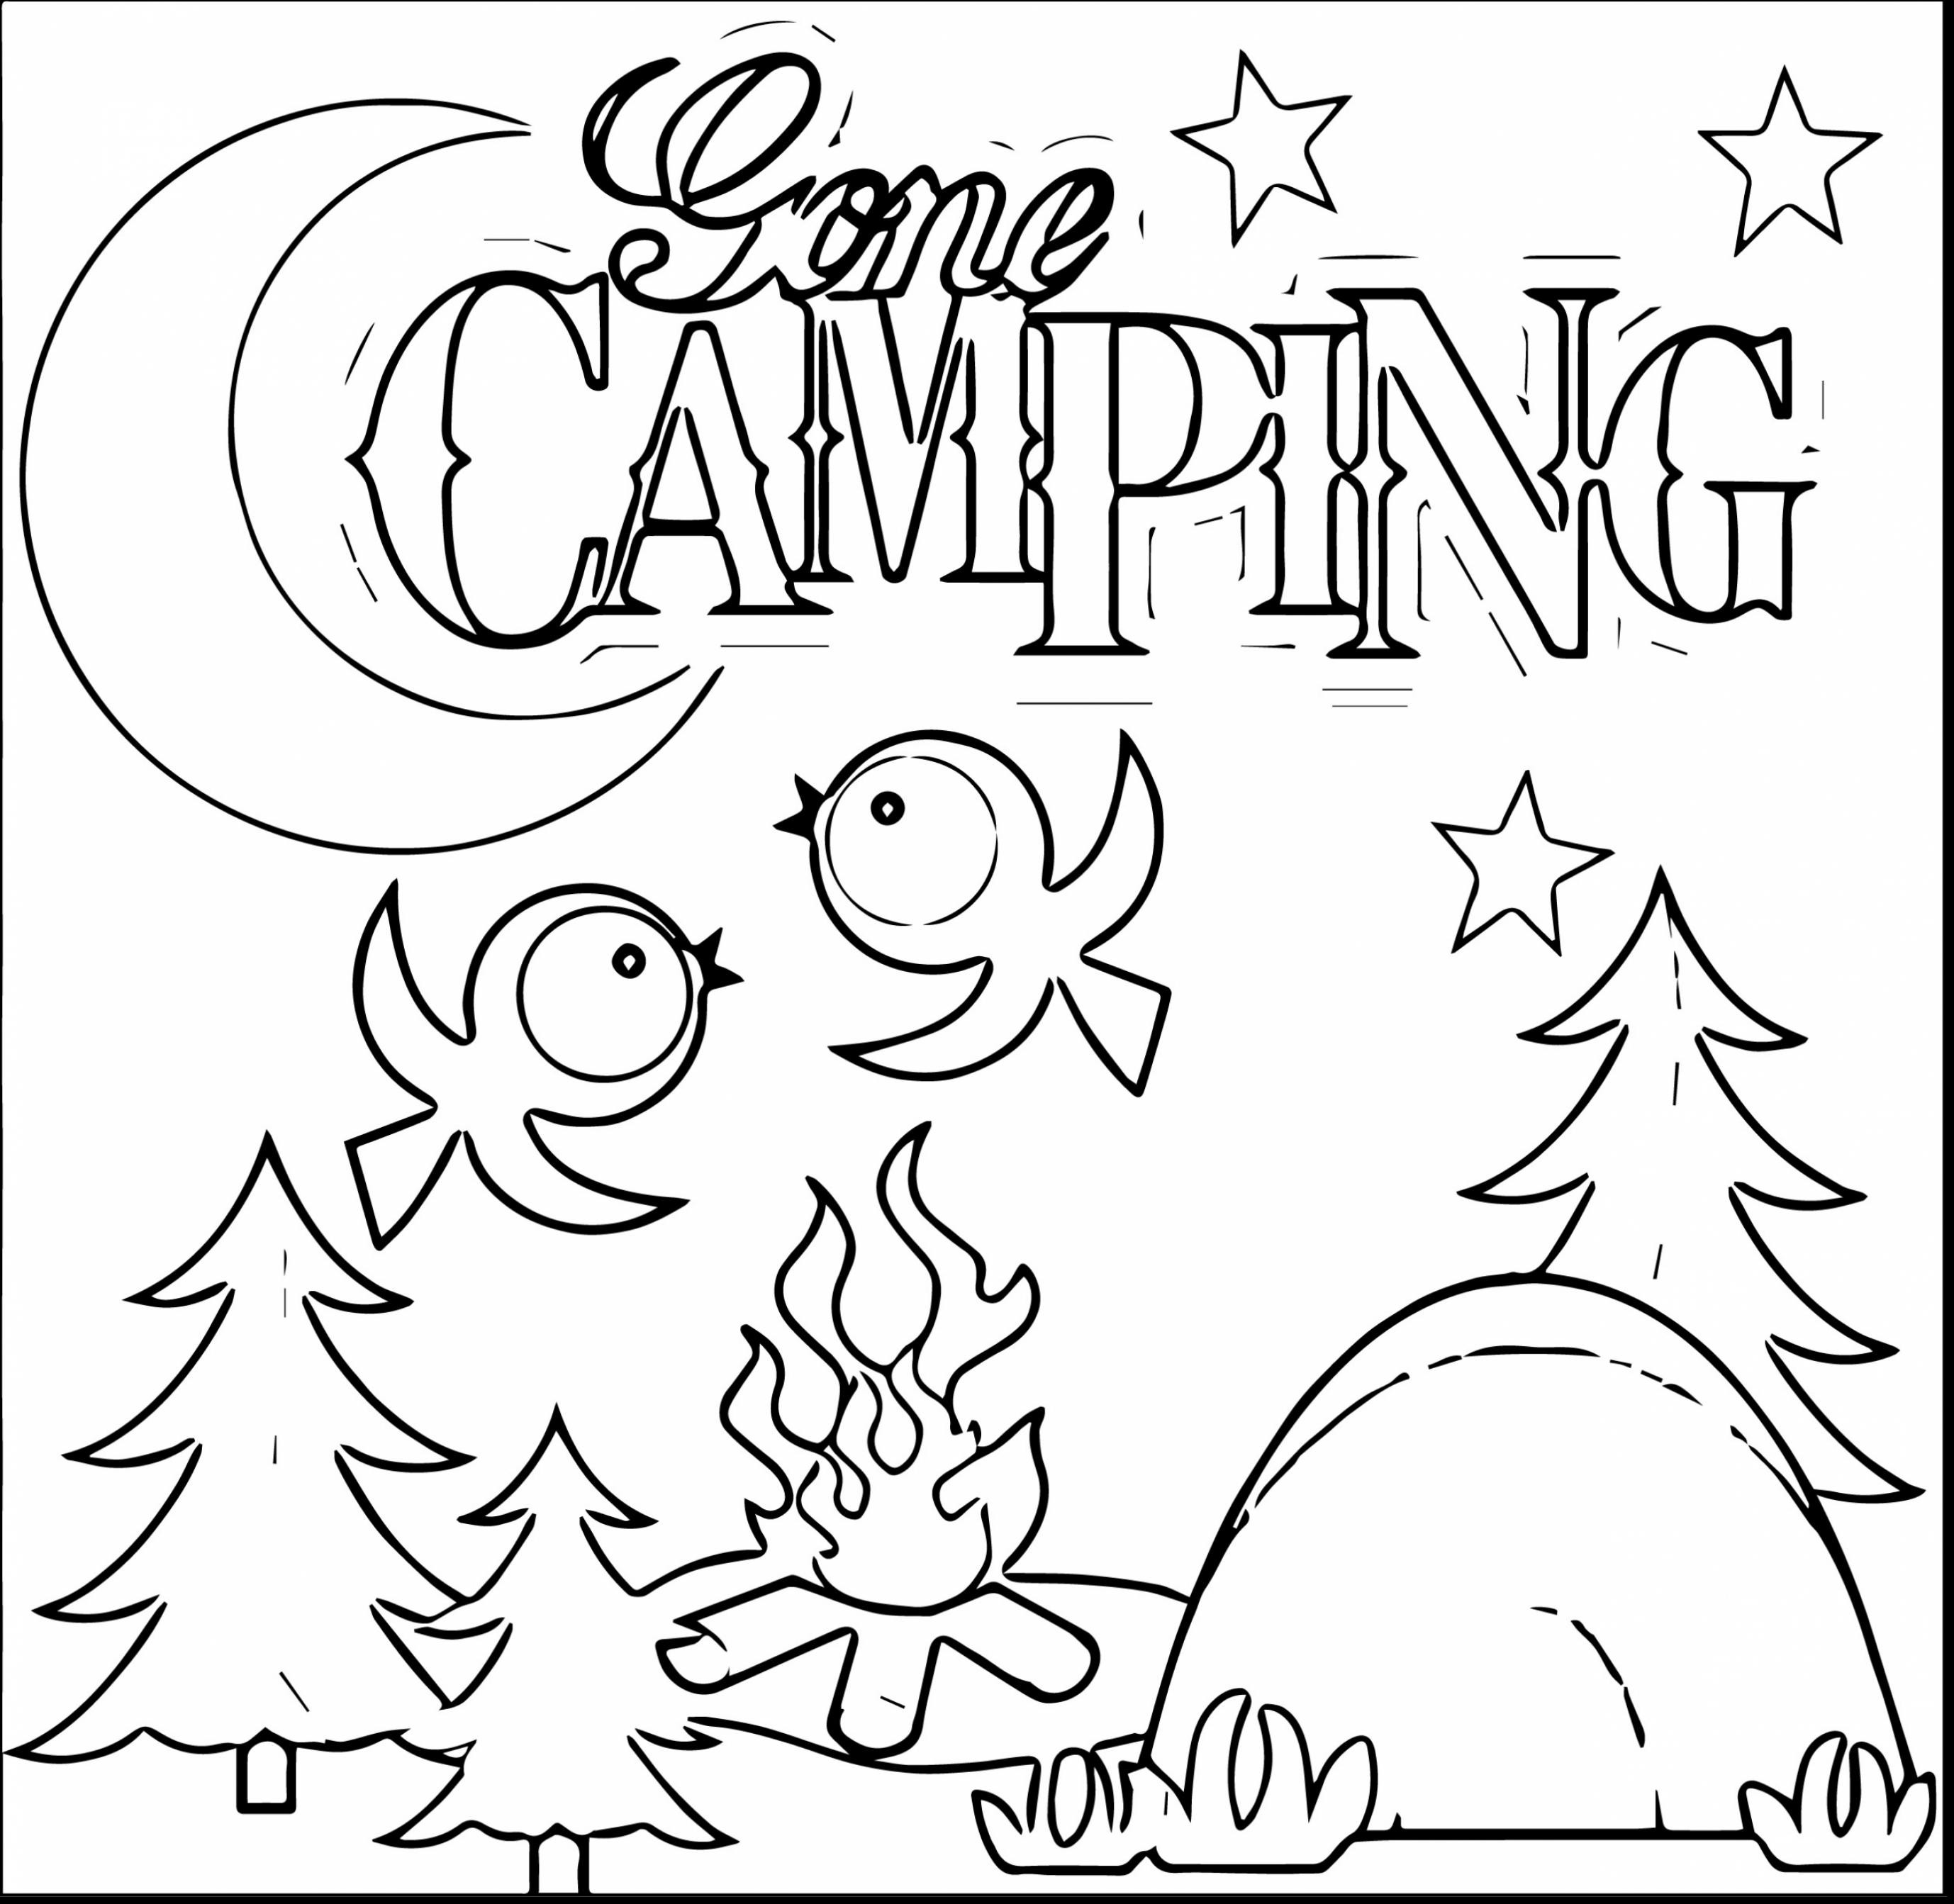 camper-coloring-pages-coloring-home